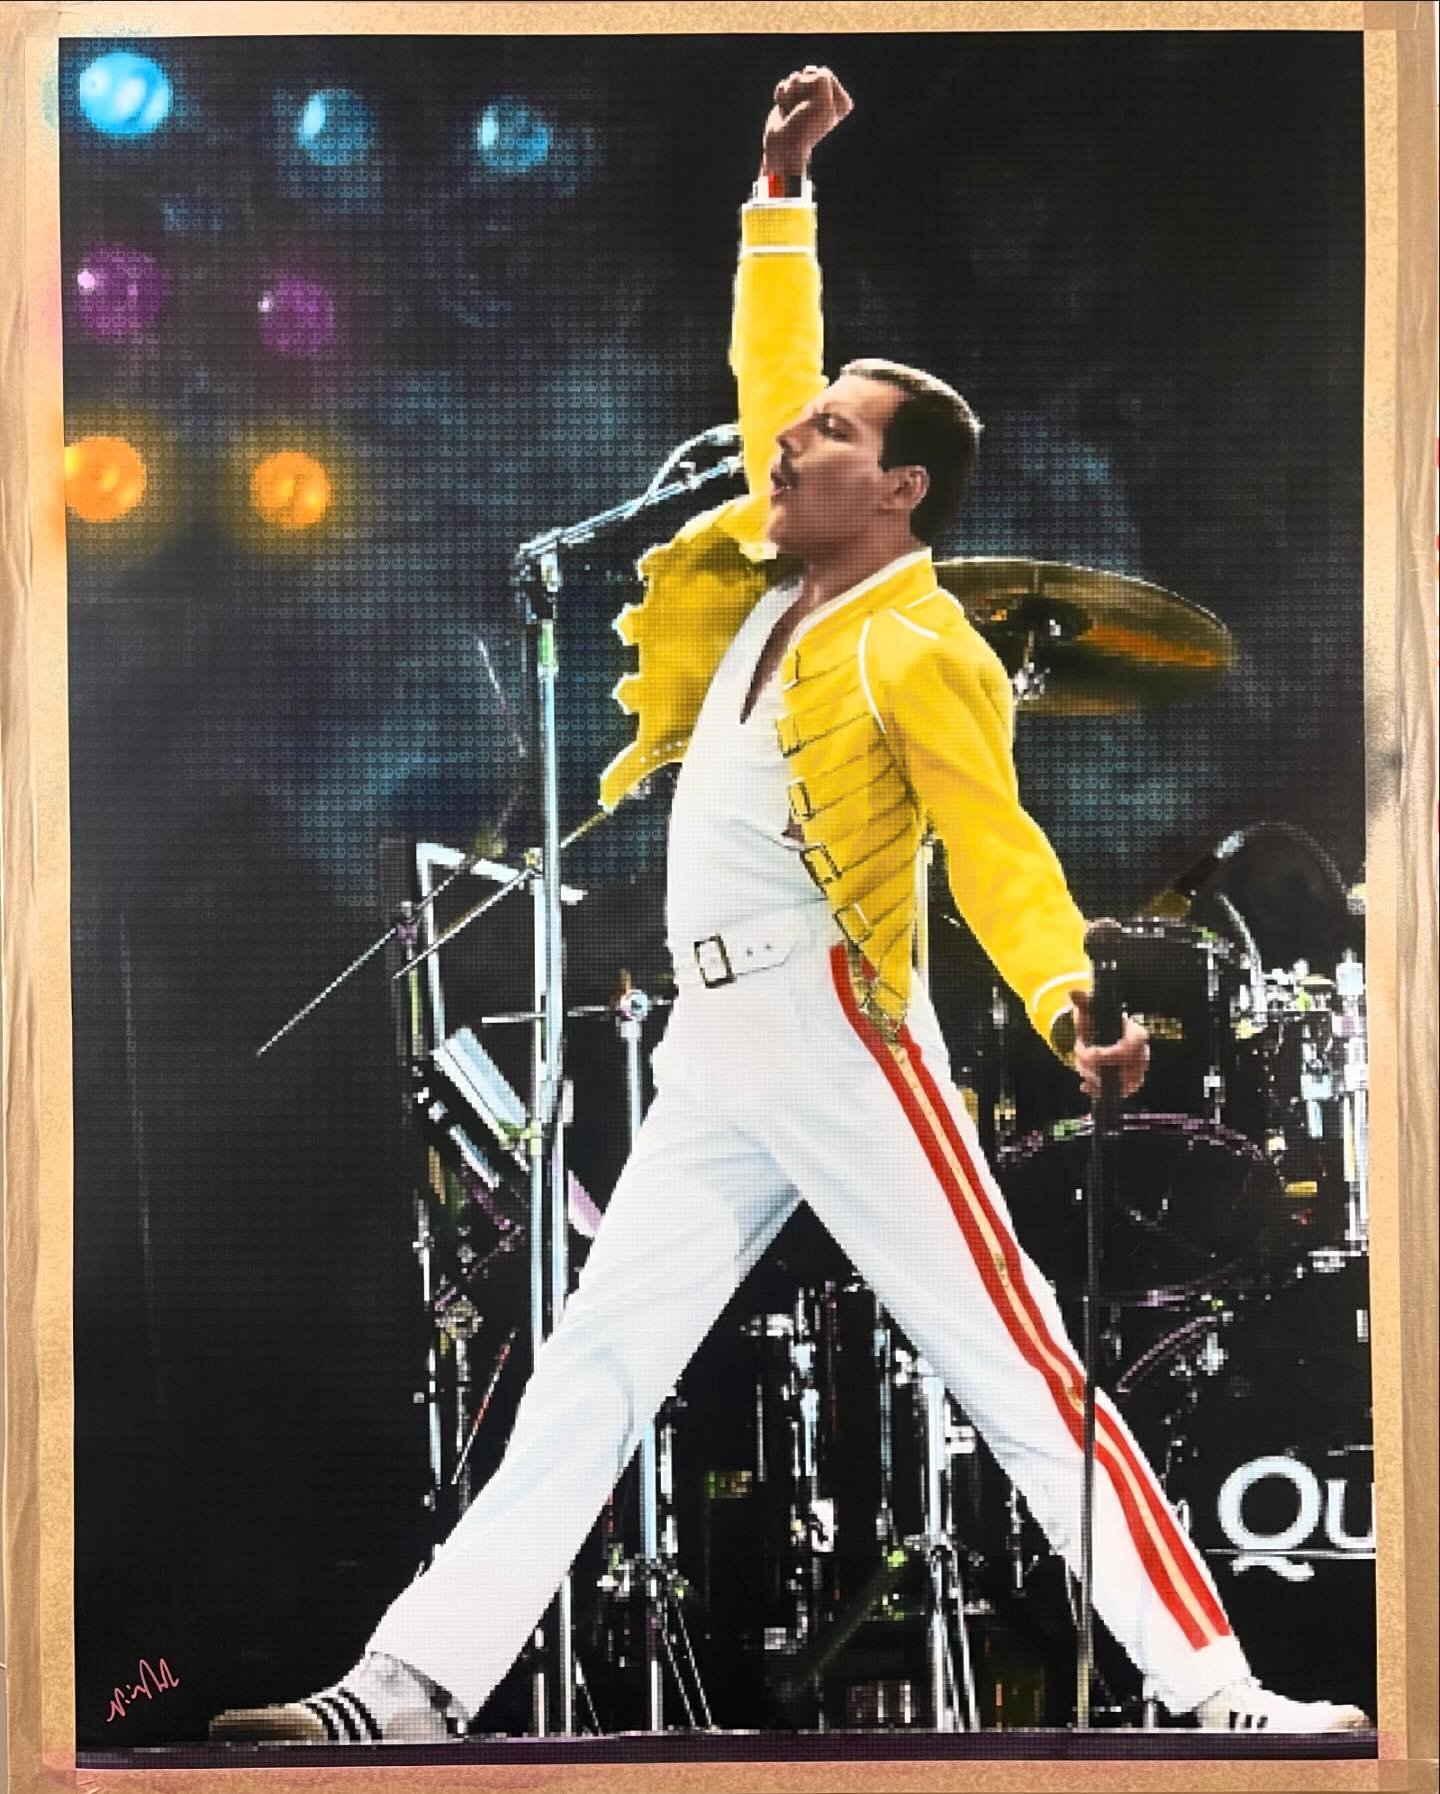 Here&rsquo;s my next Portrait from February. Freddie Mercury on stage at Wembley stadium. The year was 1986, one year after Live Aid. Such an iconic outfit and pose. This piece is available through Clarendon Fine Art. 

#freddiemercury #queen #wemble